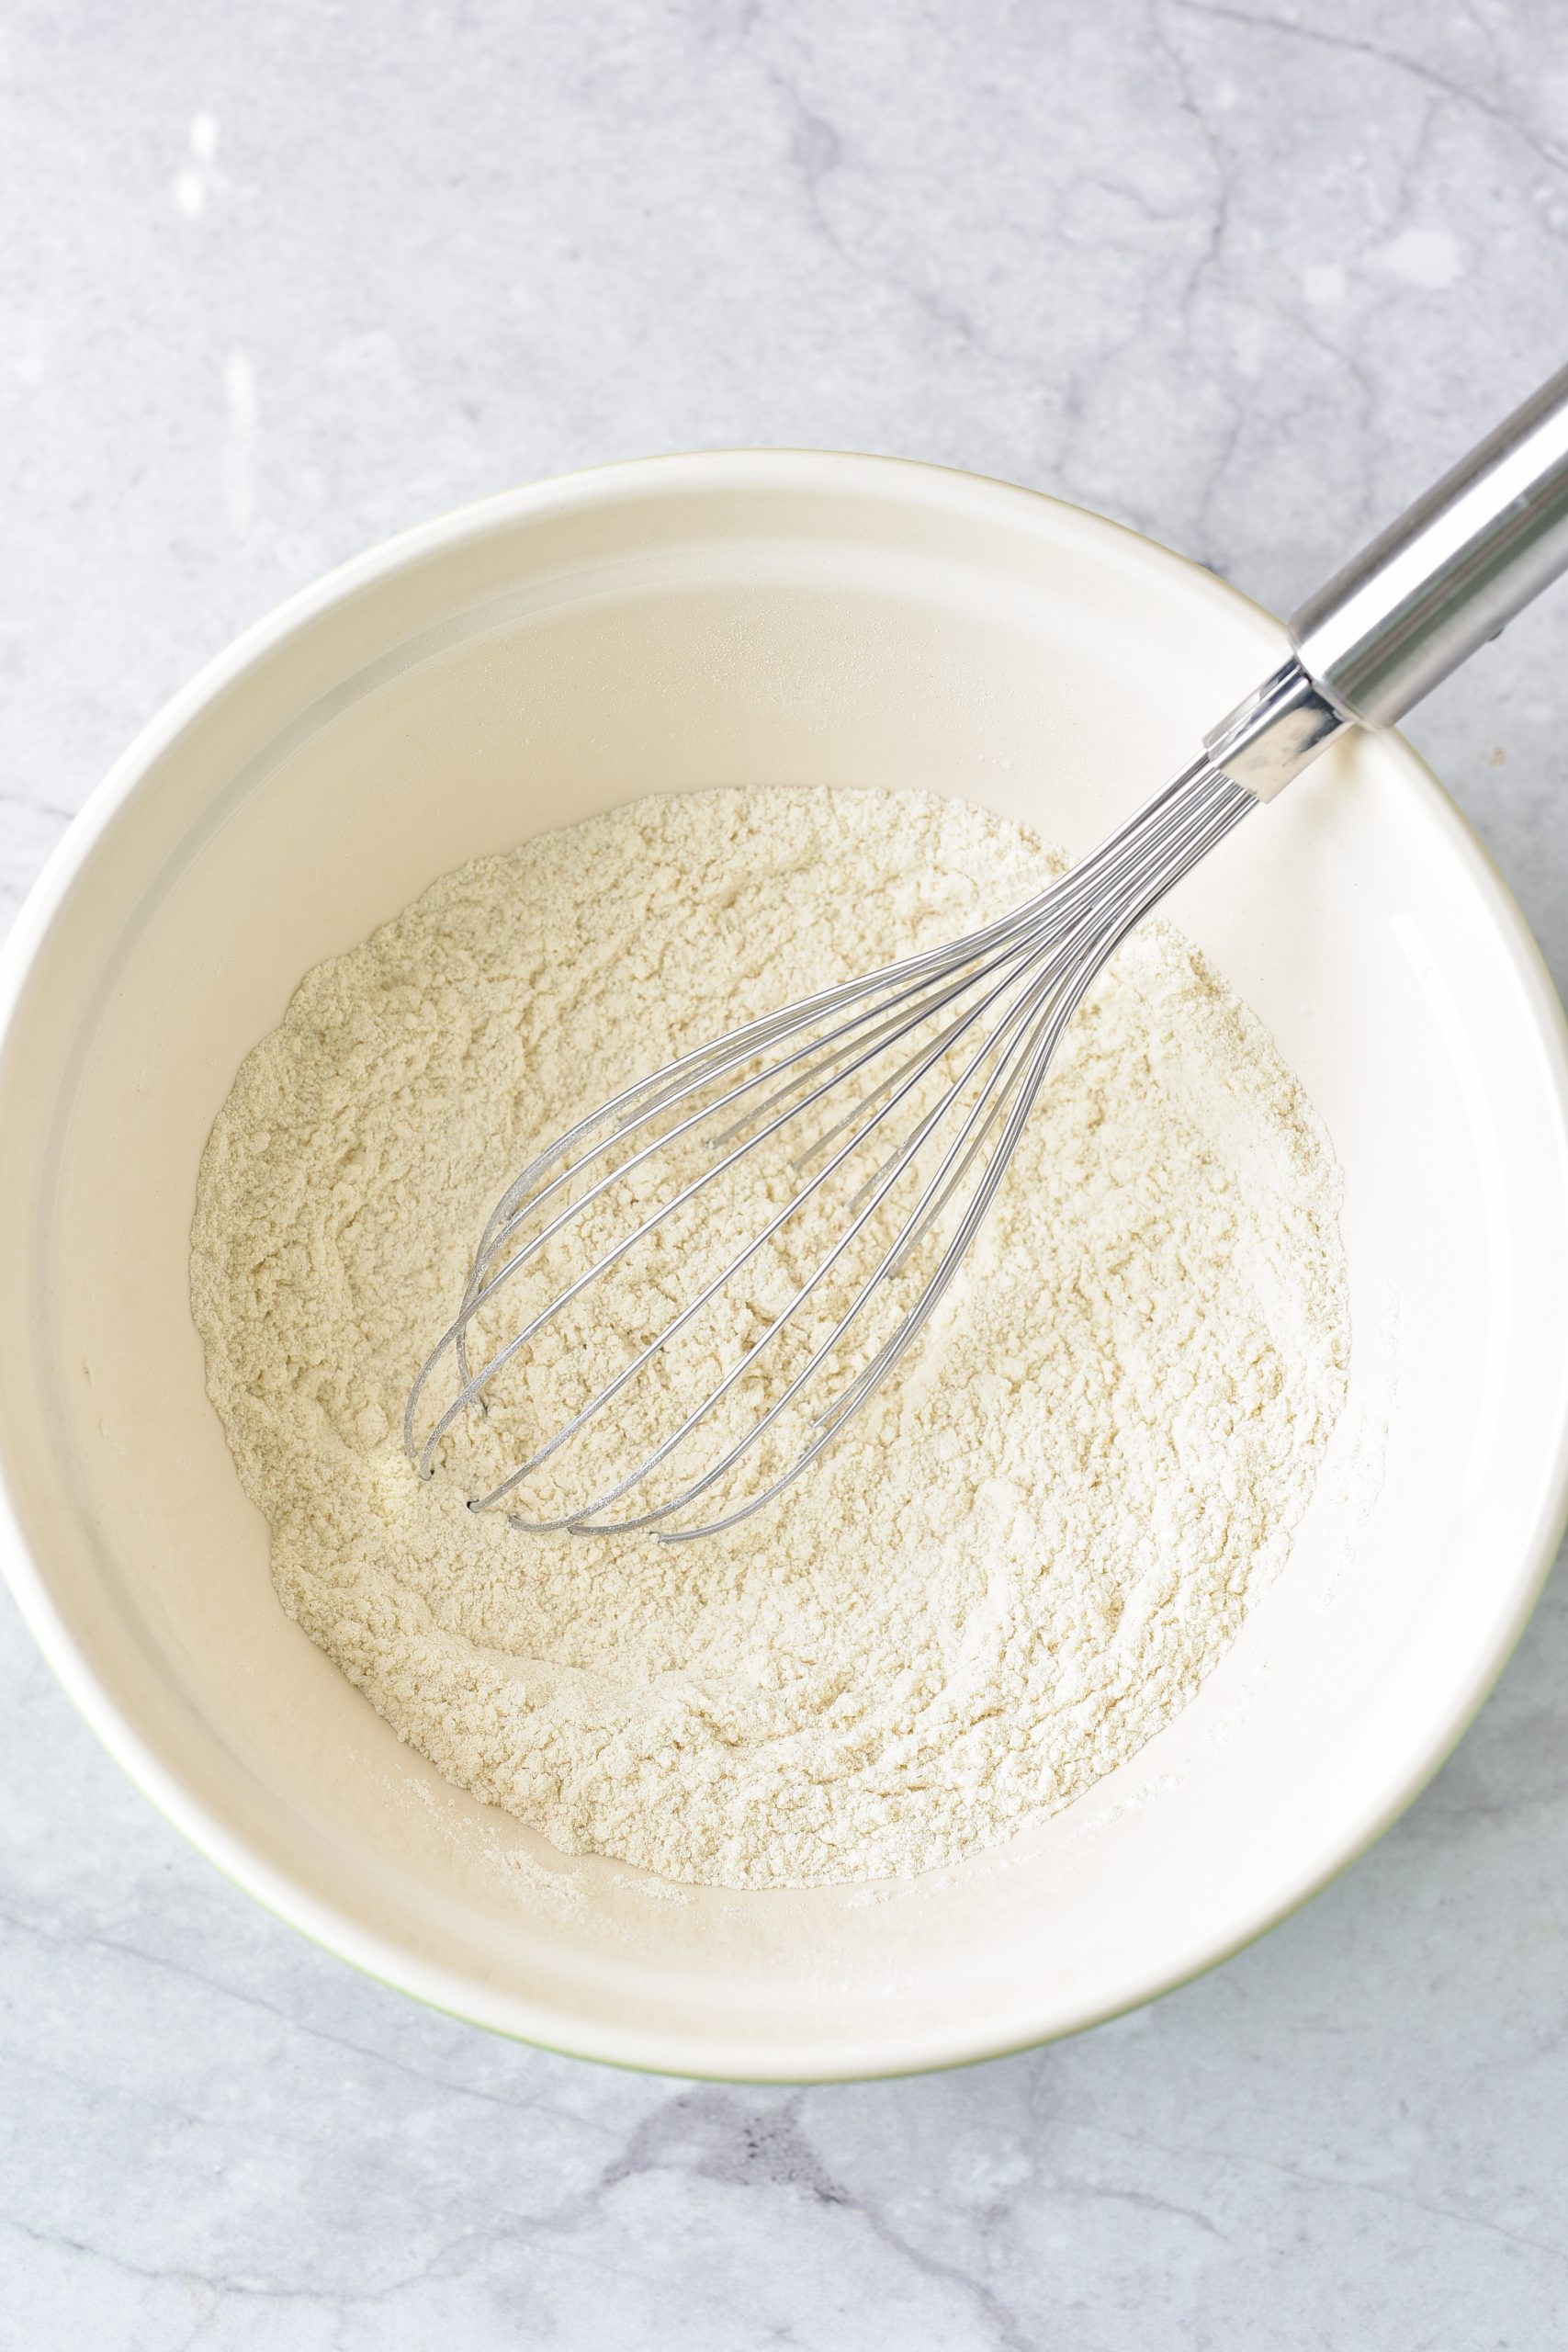 Mix together the flour, salt, baking powder, and baking soda in a bowl. 